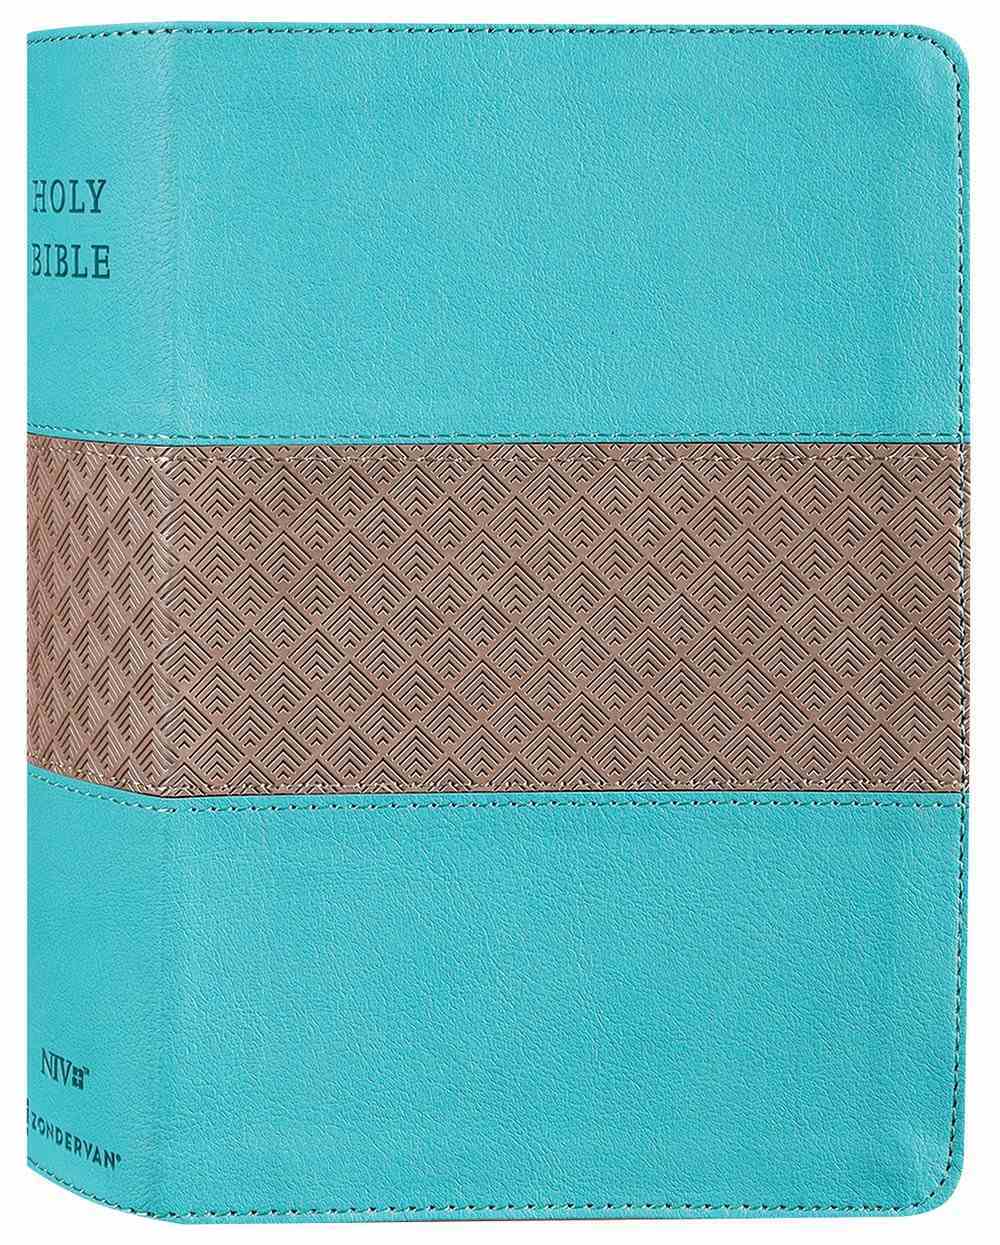 NIV Giant Print Compact Bible Teal (Red Letter Edition) Premium Imitation Leather